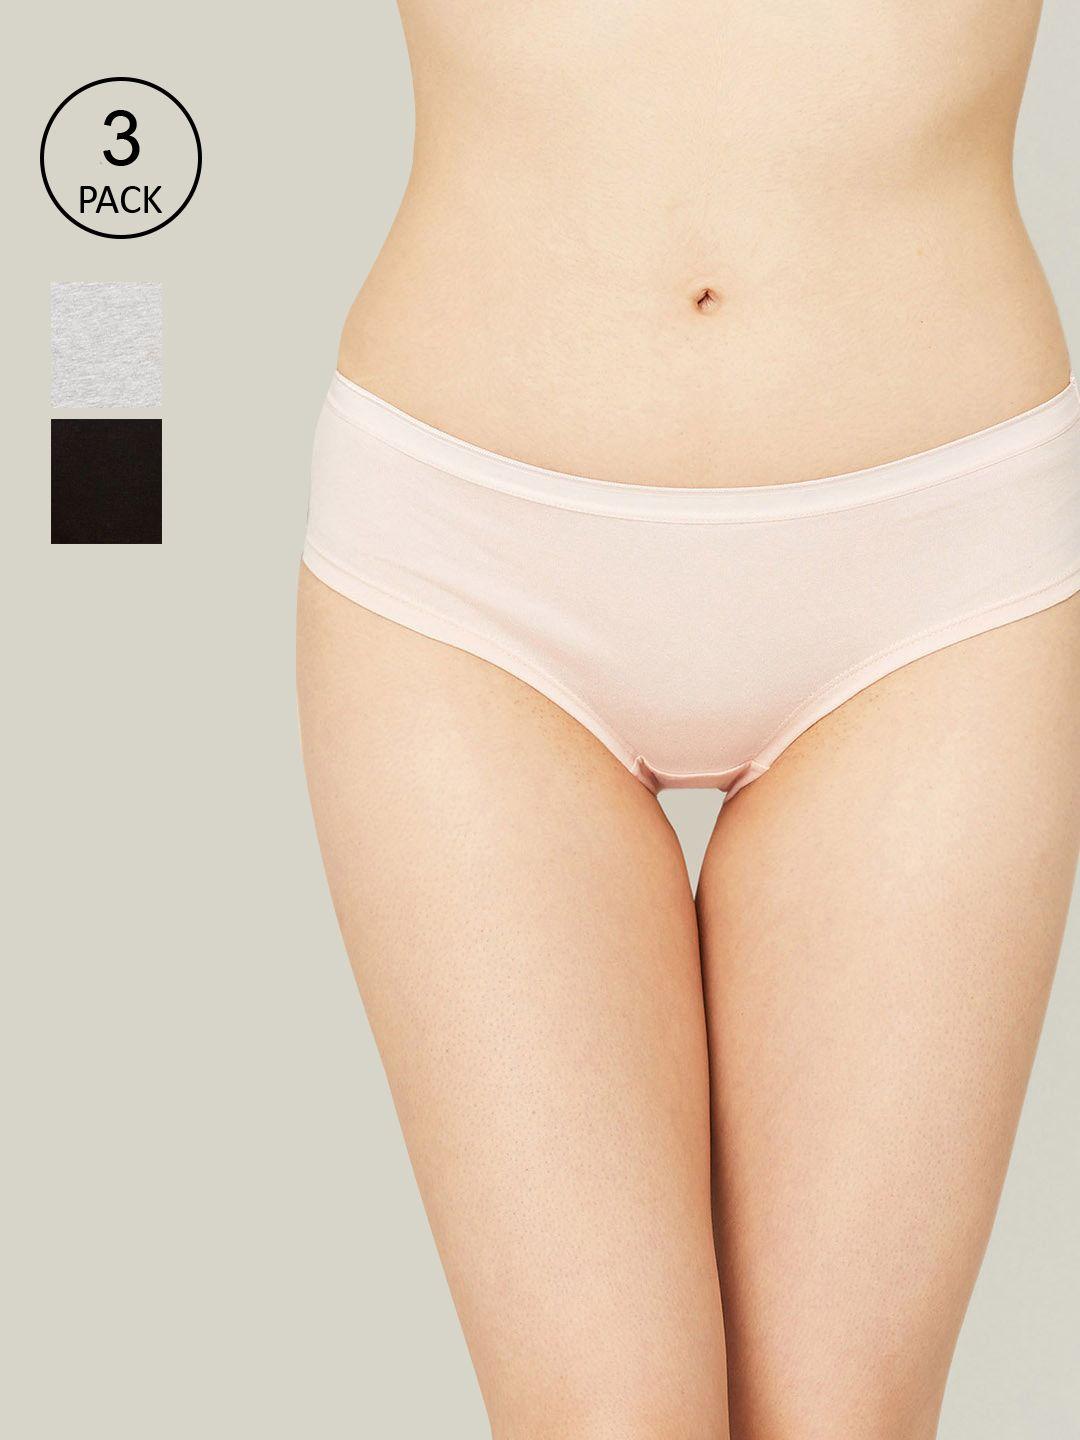 ginger by lifestyle women pack of 3 assorted cotton hipster briefs